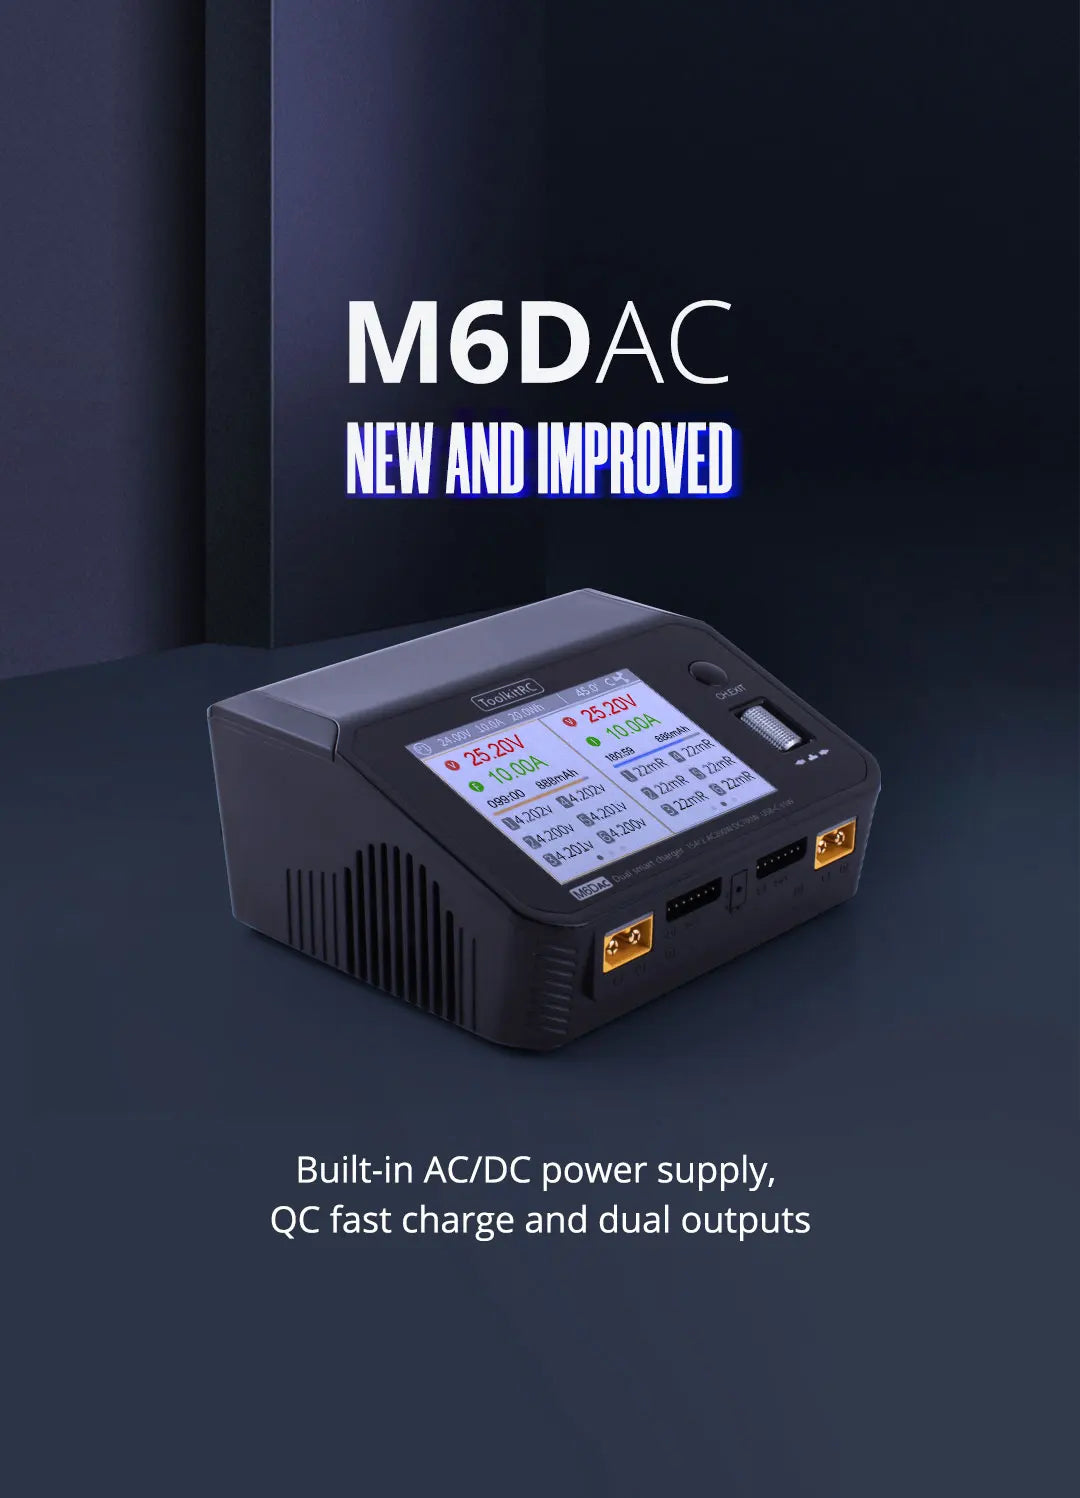 ToolkitRC M6DAC Charger, MGDAC NEL AND IHPROVEL Built-in ACIDC power supply;